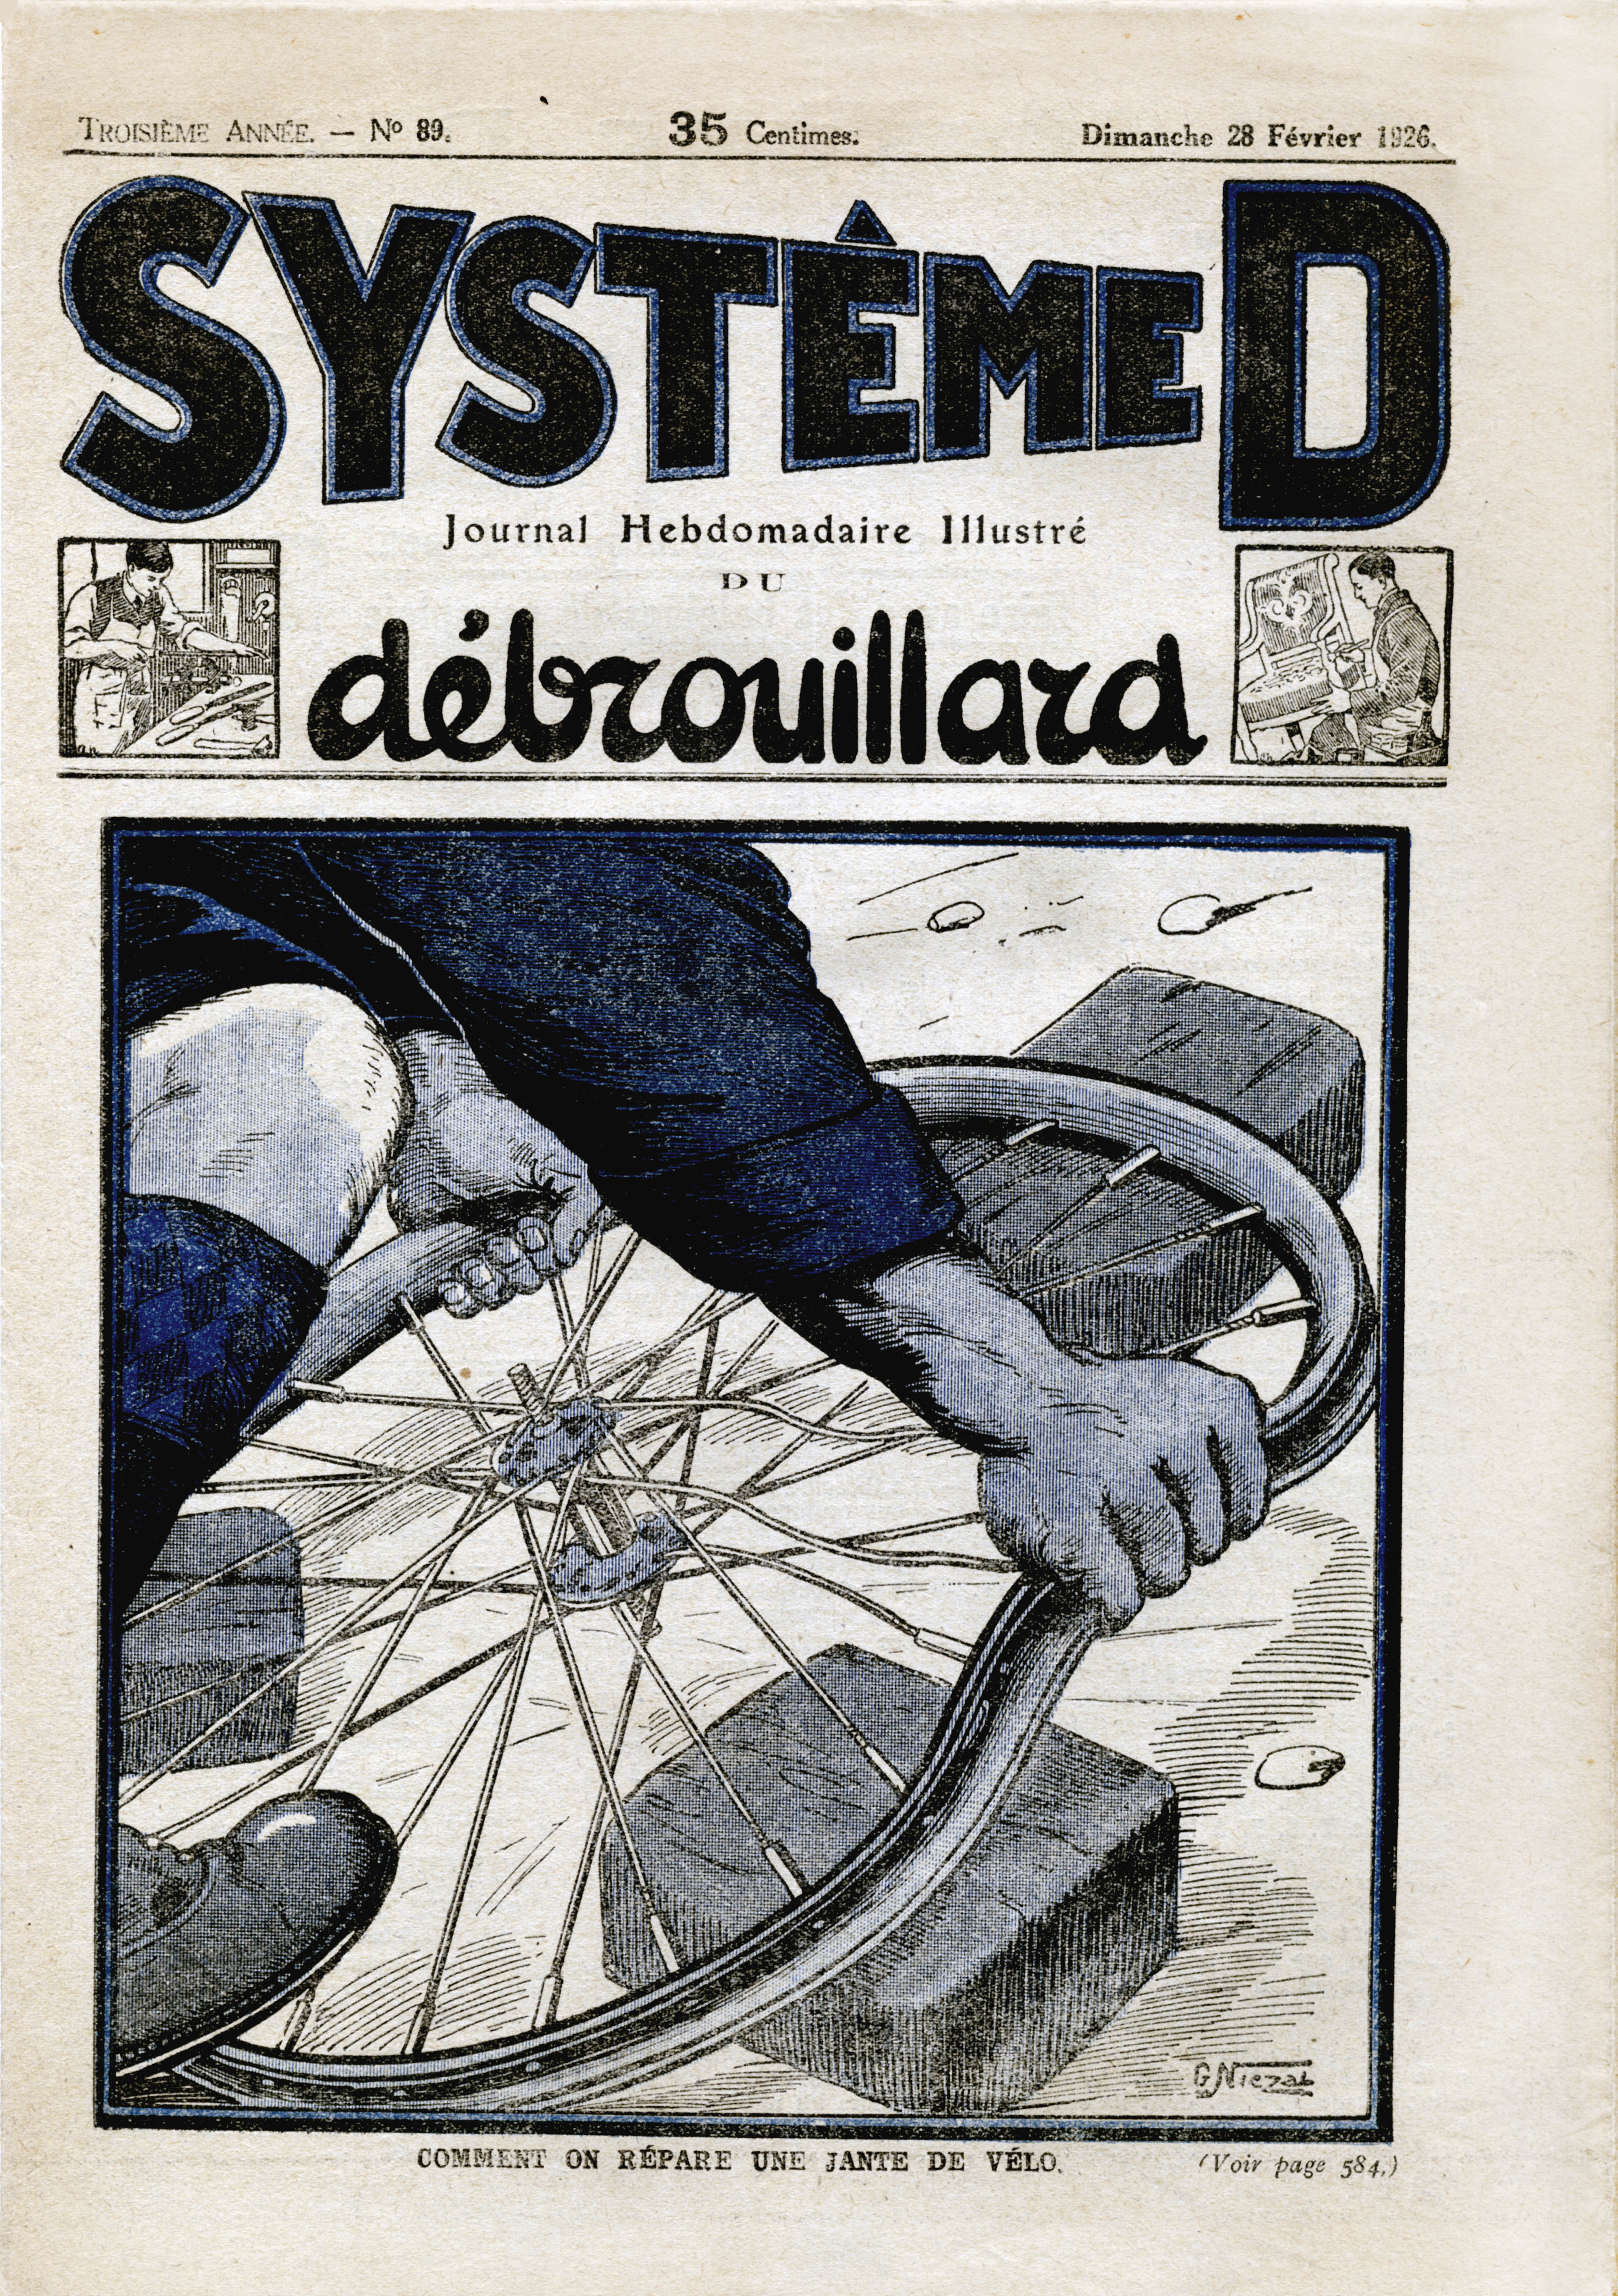 System D Cover from 28 February 1926